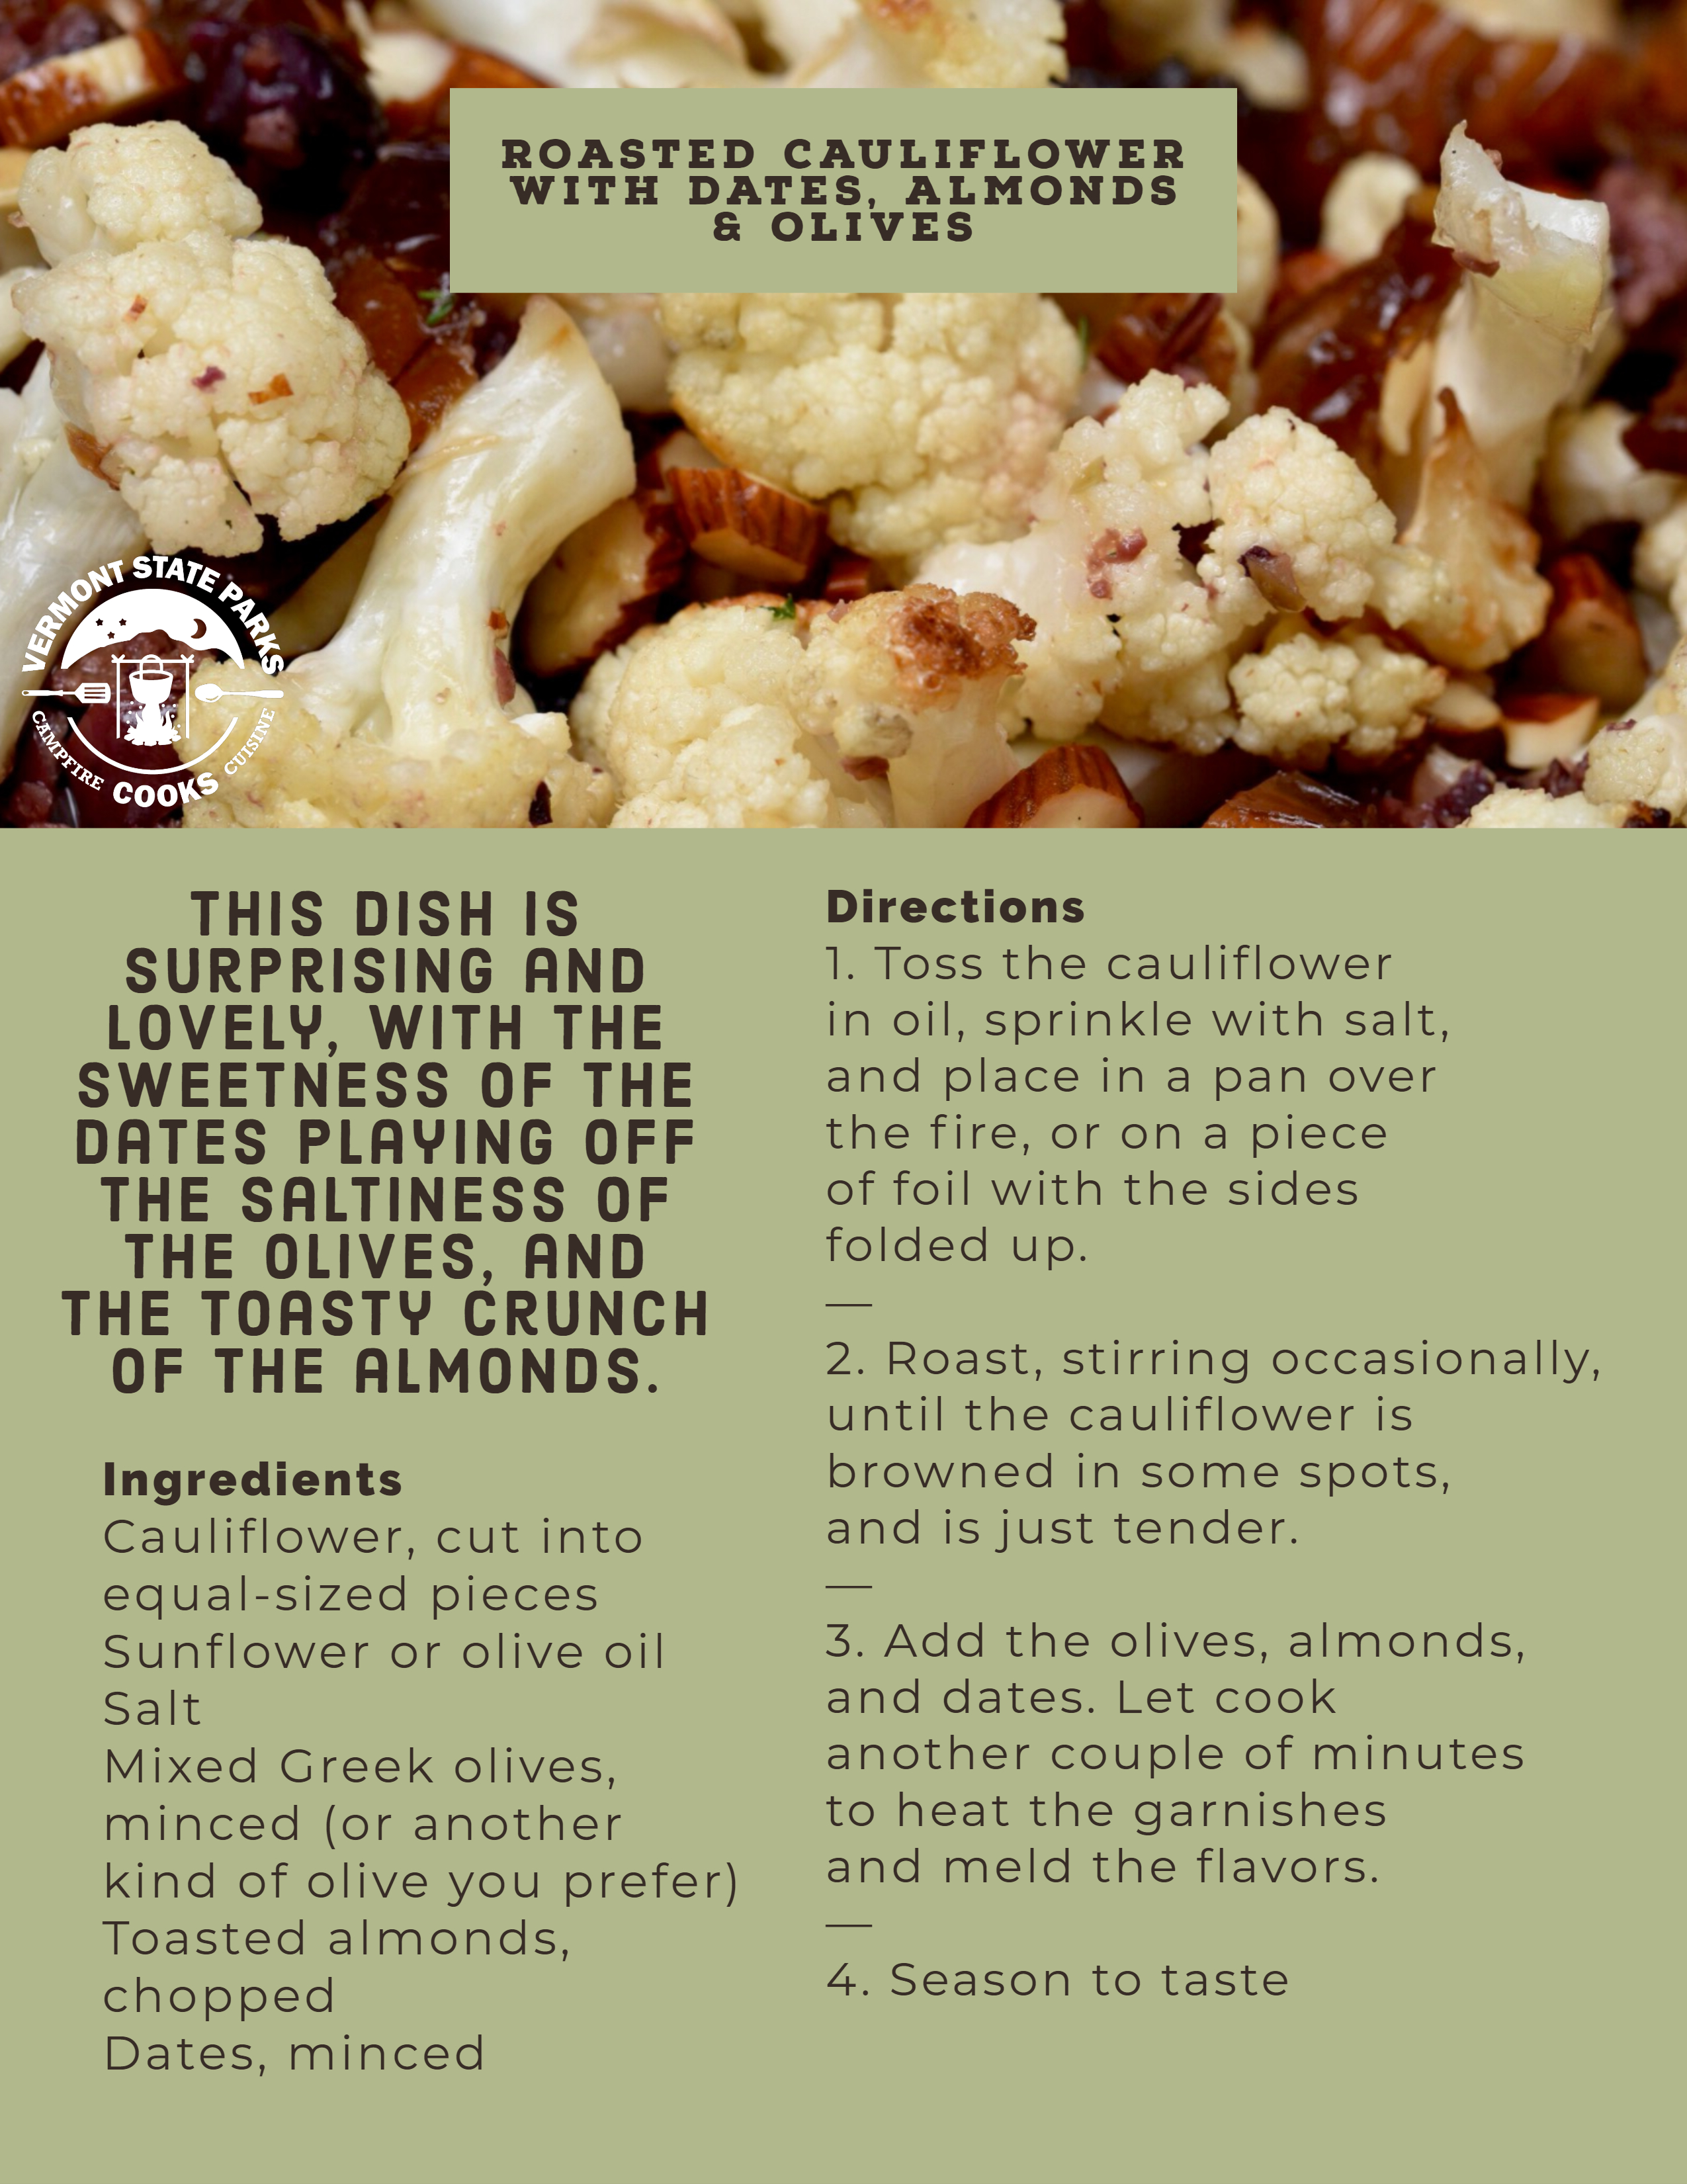 Roasted Cauliflower with Dates, Almonds & Olives